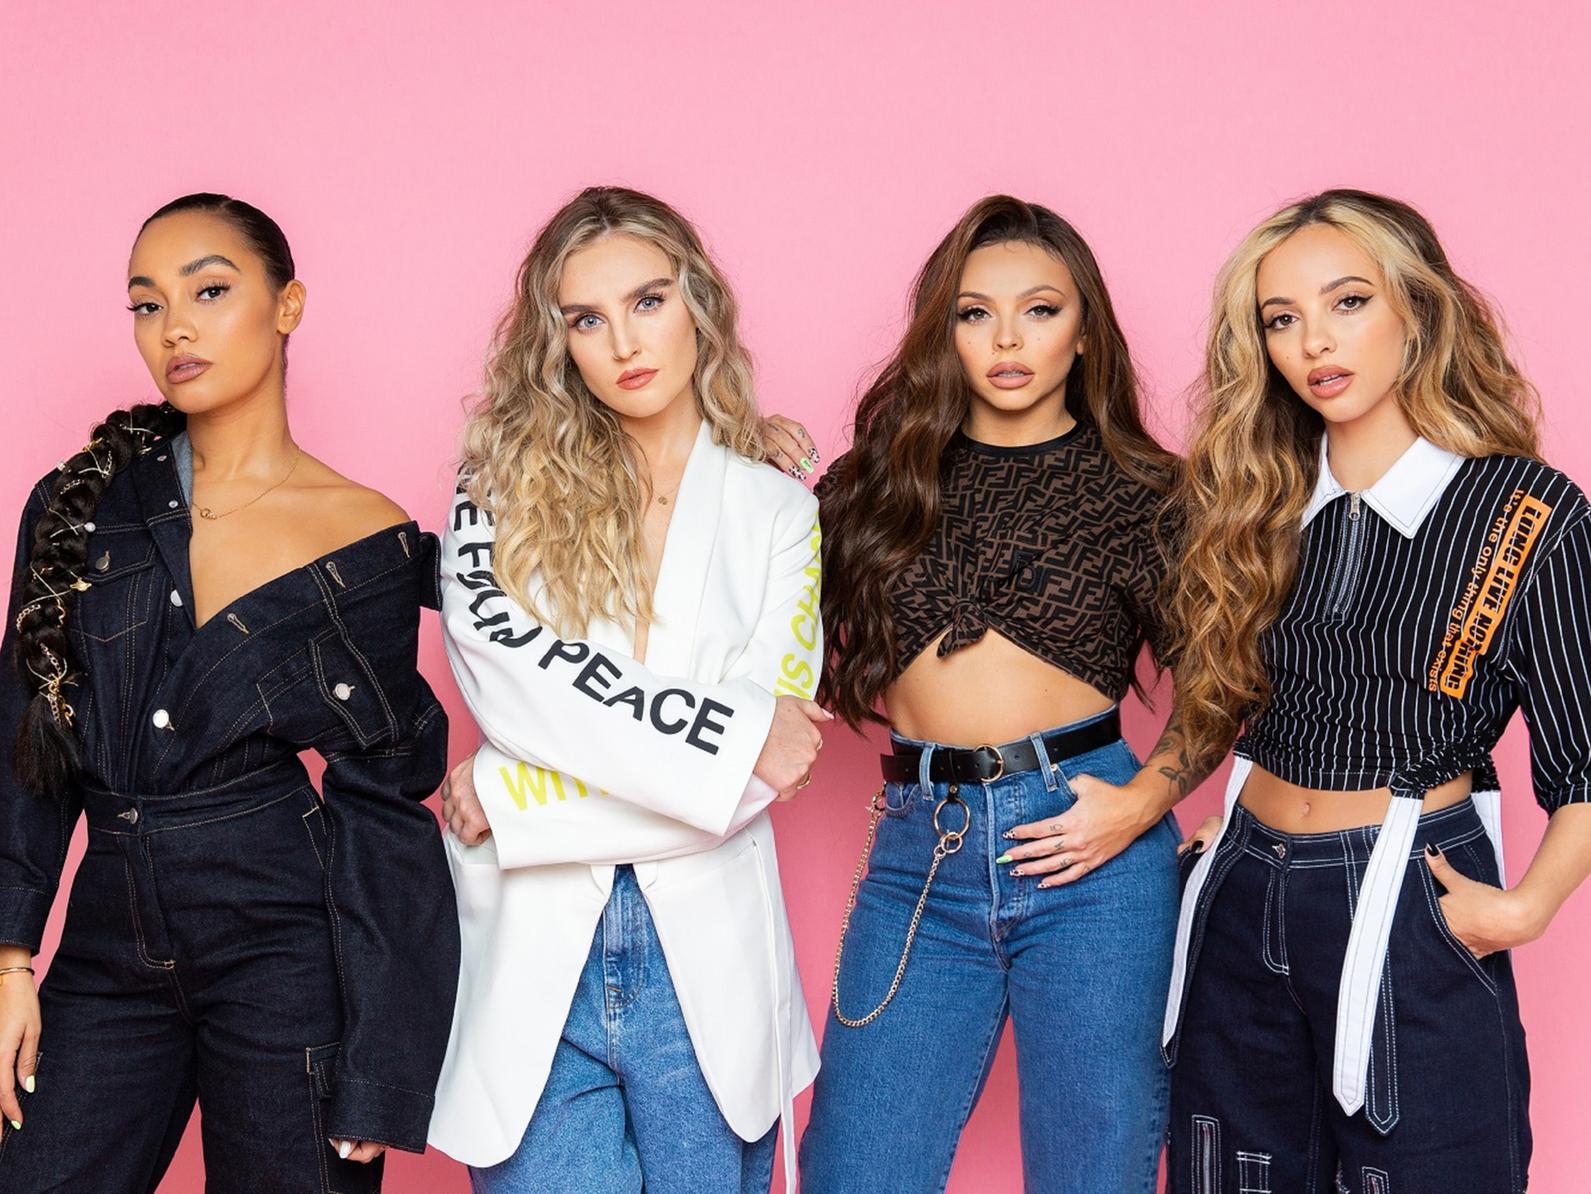 Pop superstars Little Mix are bringing their unmissable live show to Lytham Festival 2020.